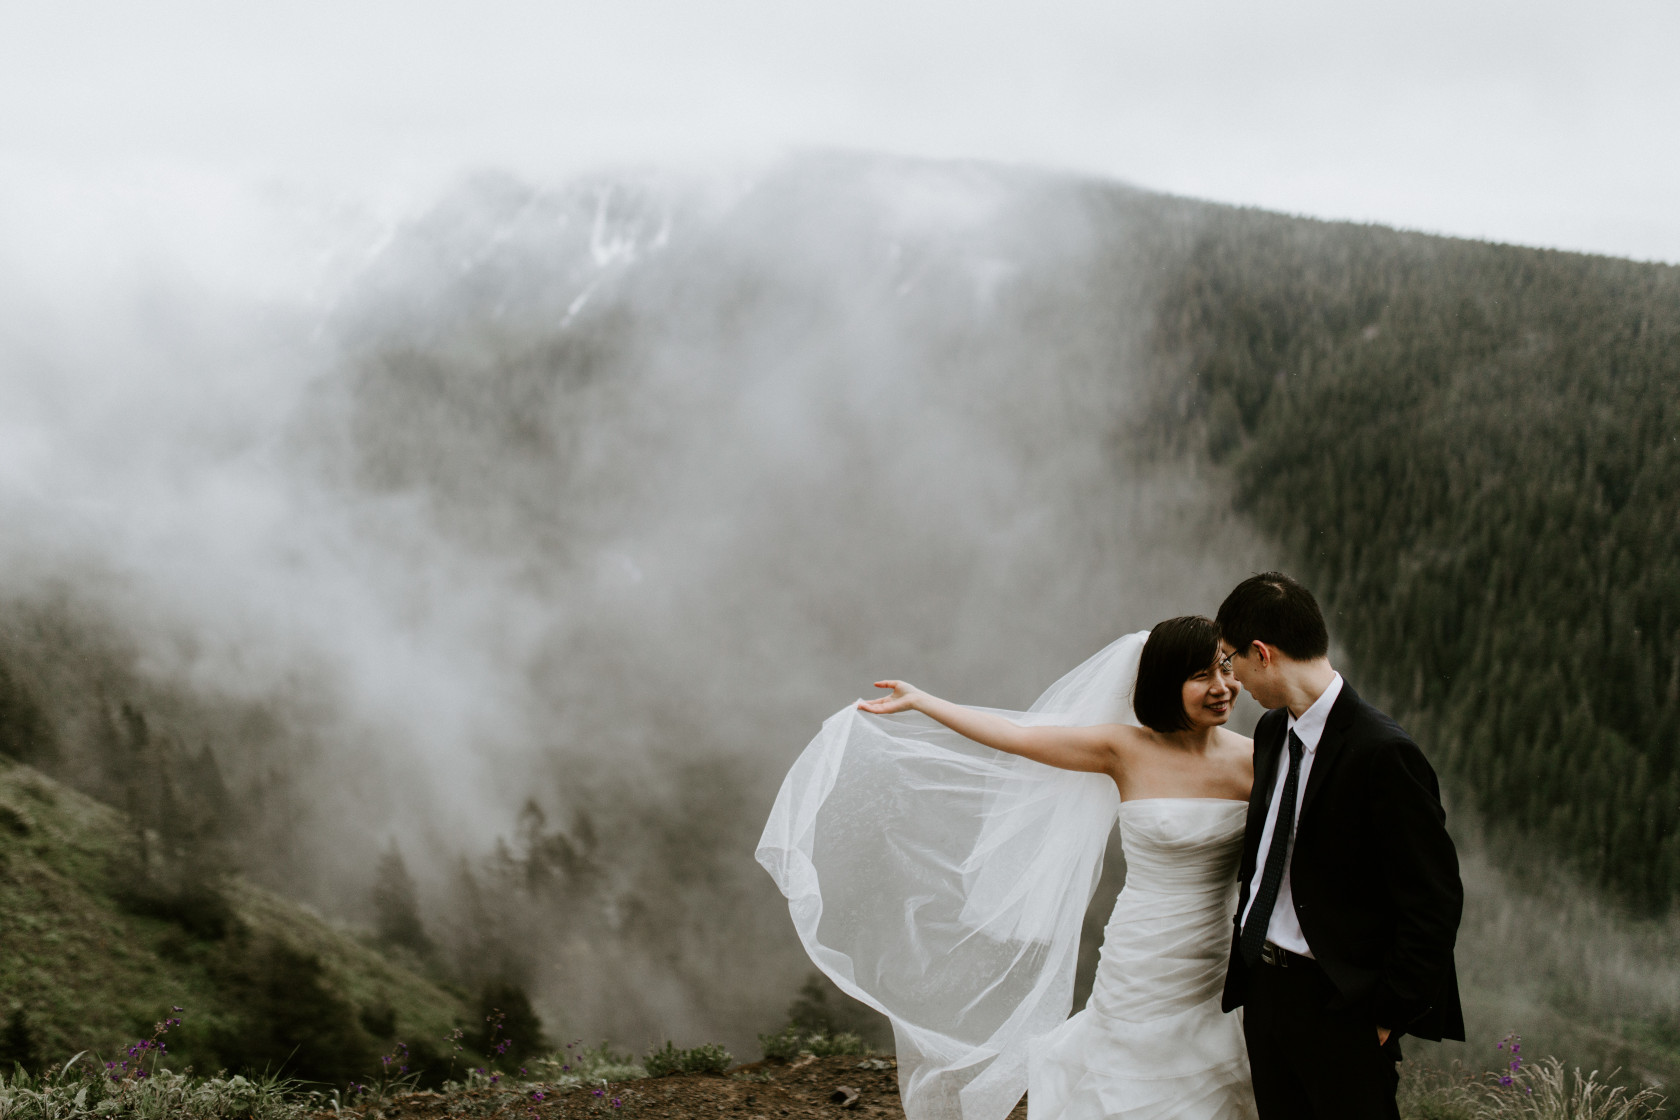 Valerie holds her veil as Alex goes in for a kiss. Elopement wedding photography at Mount Hood by Sienna Plus Josh.